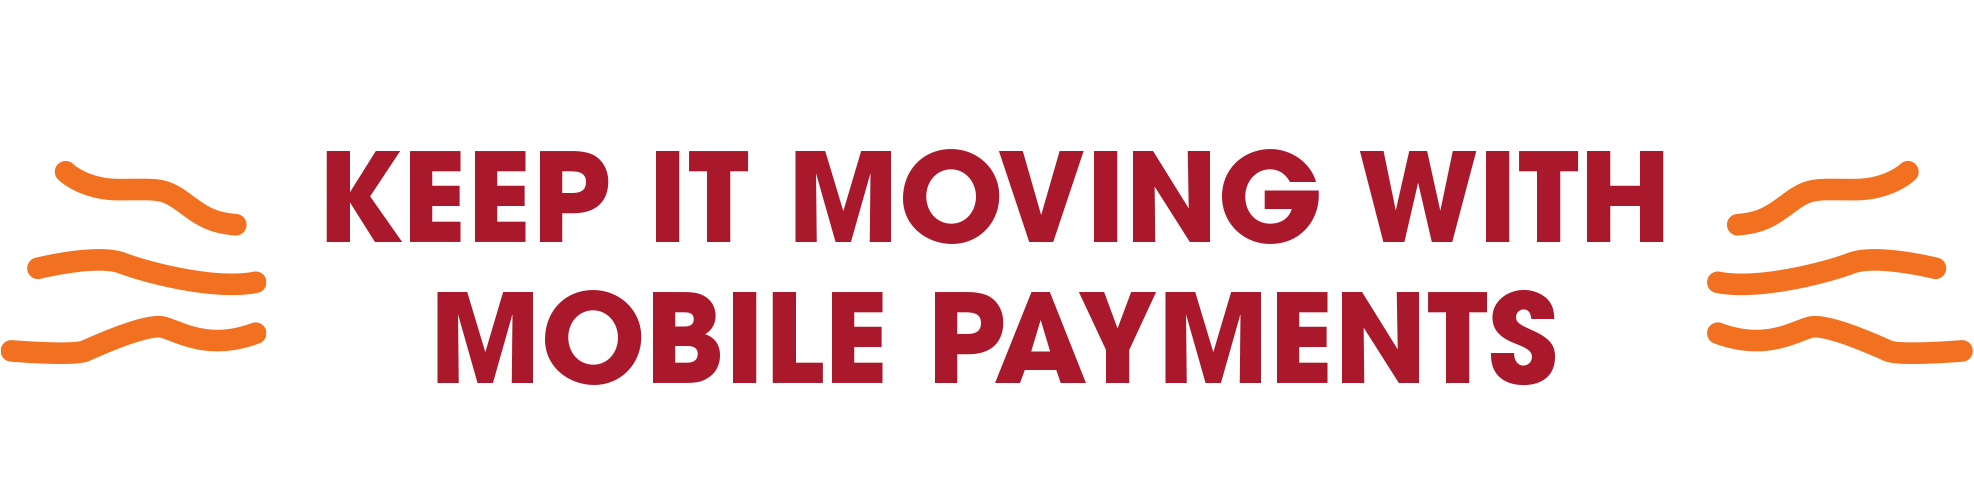 KEEP IT MOVING WITH MOBILE PAYMENTS